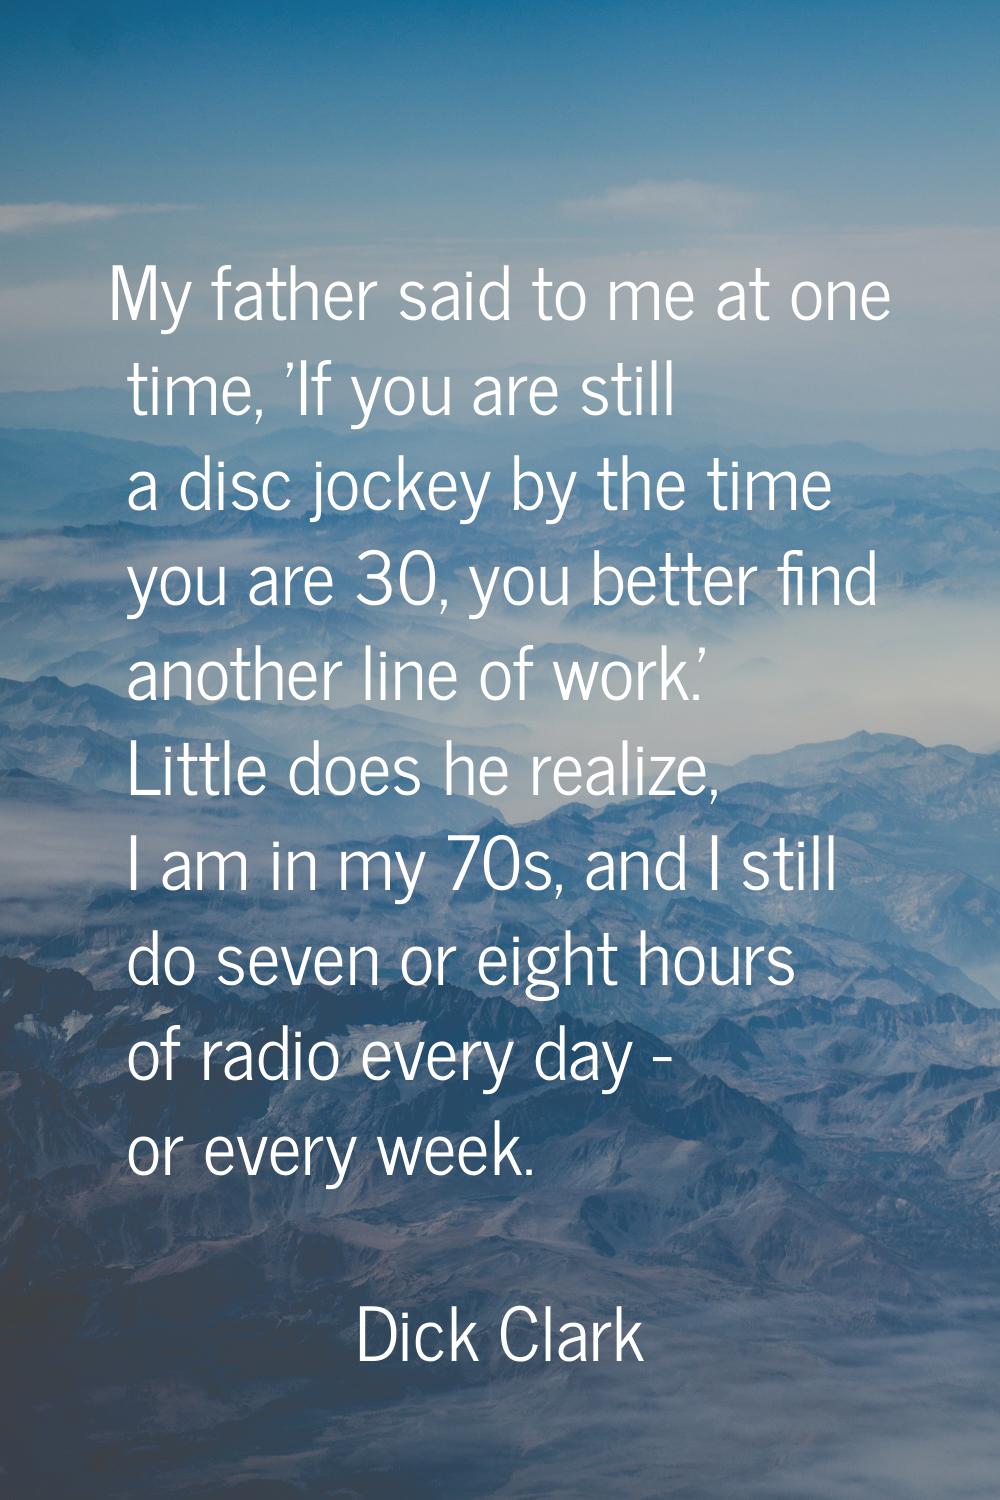 My father said to me at one time, 'If you are still a disc jockey by the time you are 30, you bette